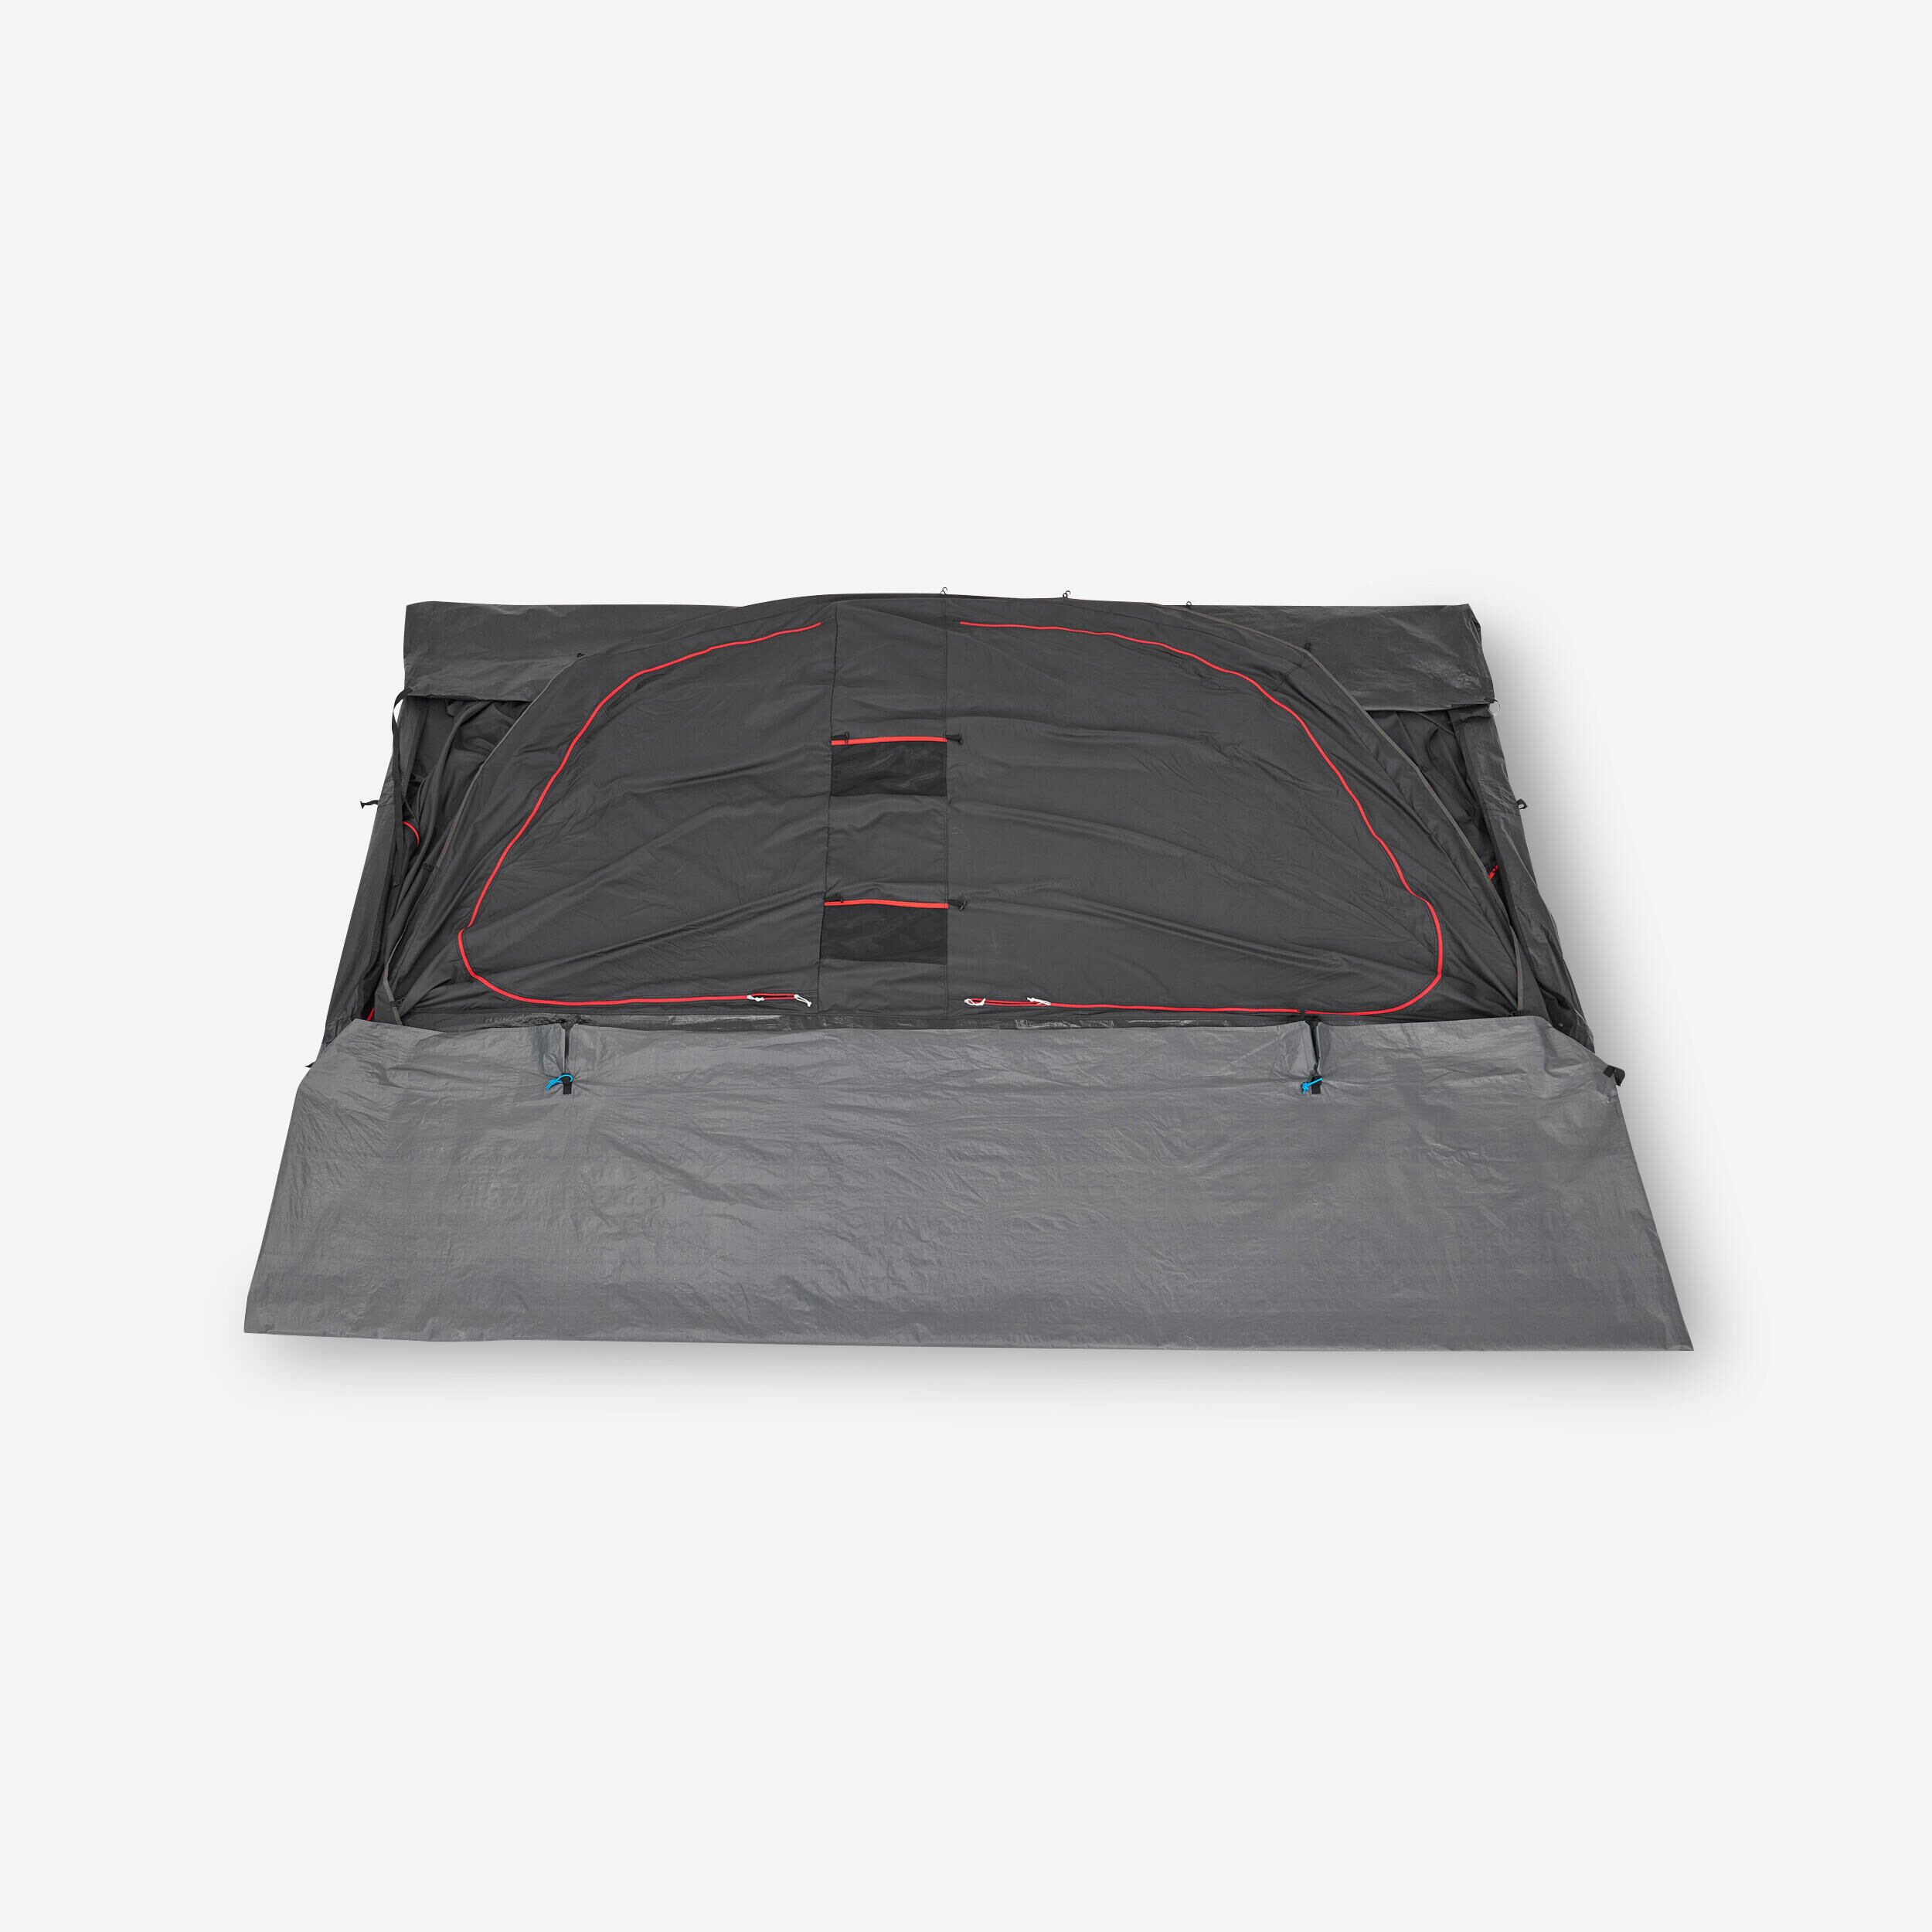 QUECHUA BEDROOM AND GROUNDSHEET - ARPENAz 5.2 Fresh&Black Tent Spare Part